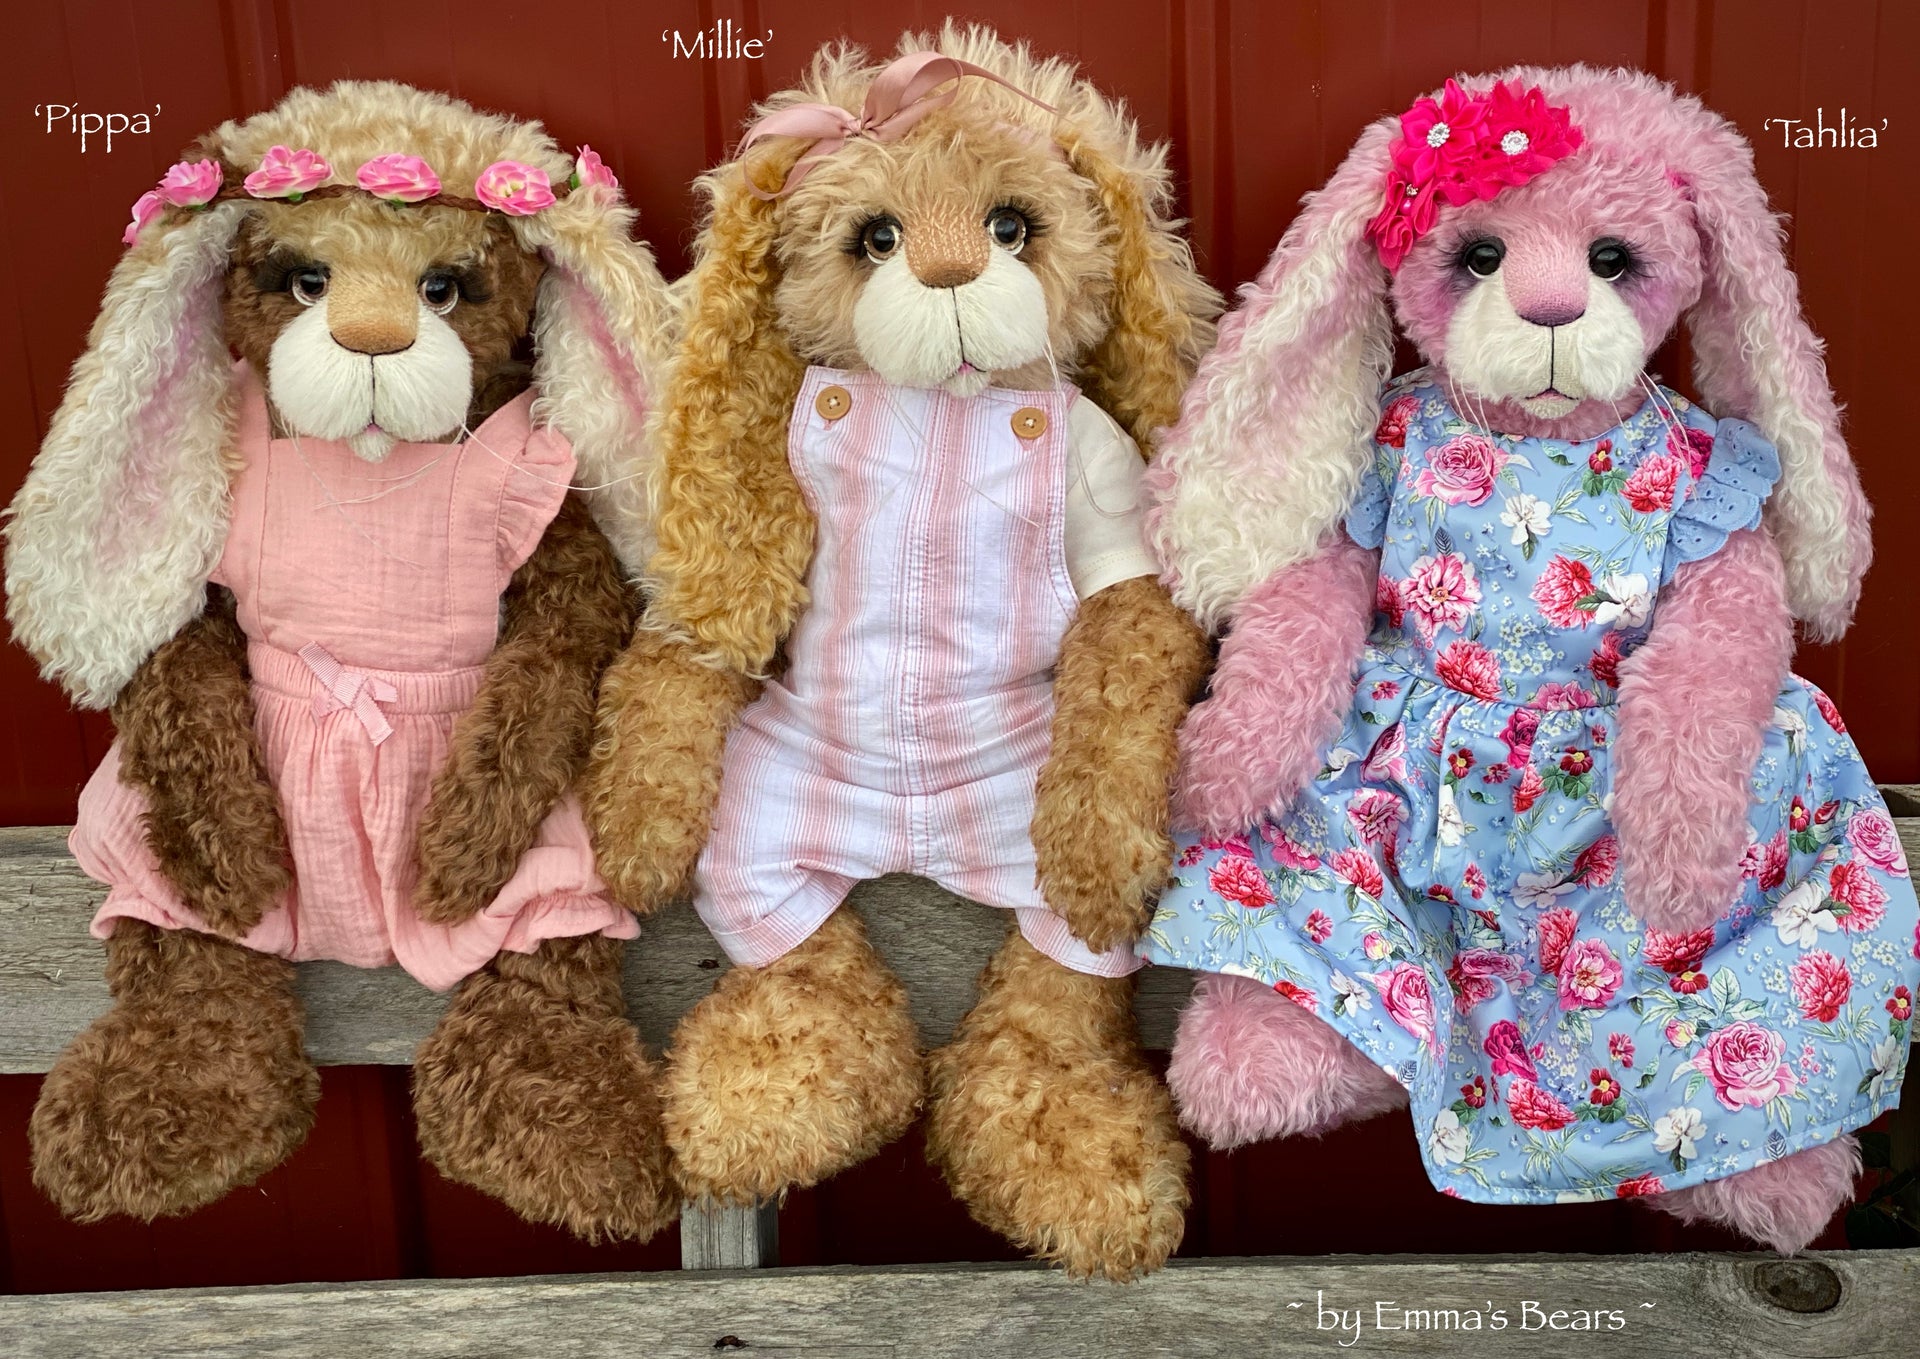 Tahlia Paige - 21" Kid Mohair Toddler Artist BUNNY by Emma's Bears - OOAK